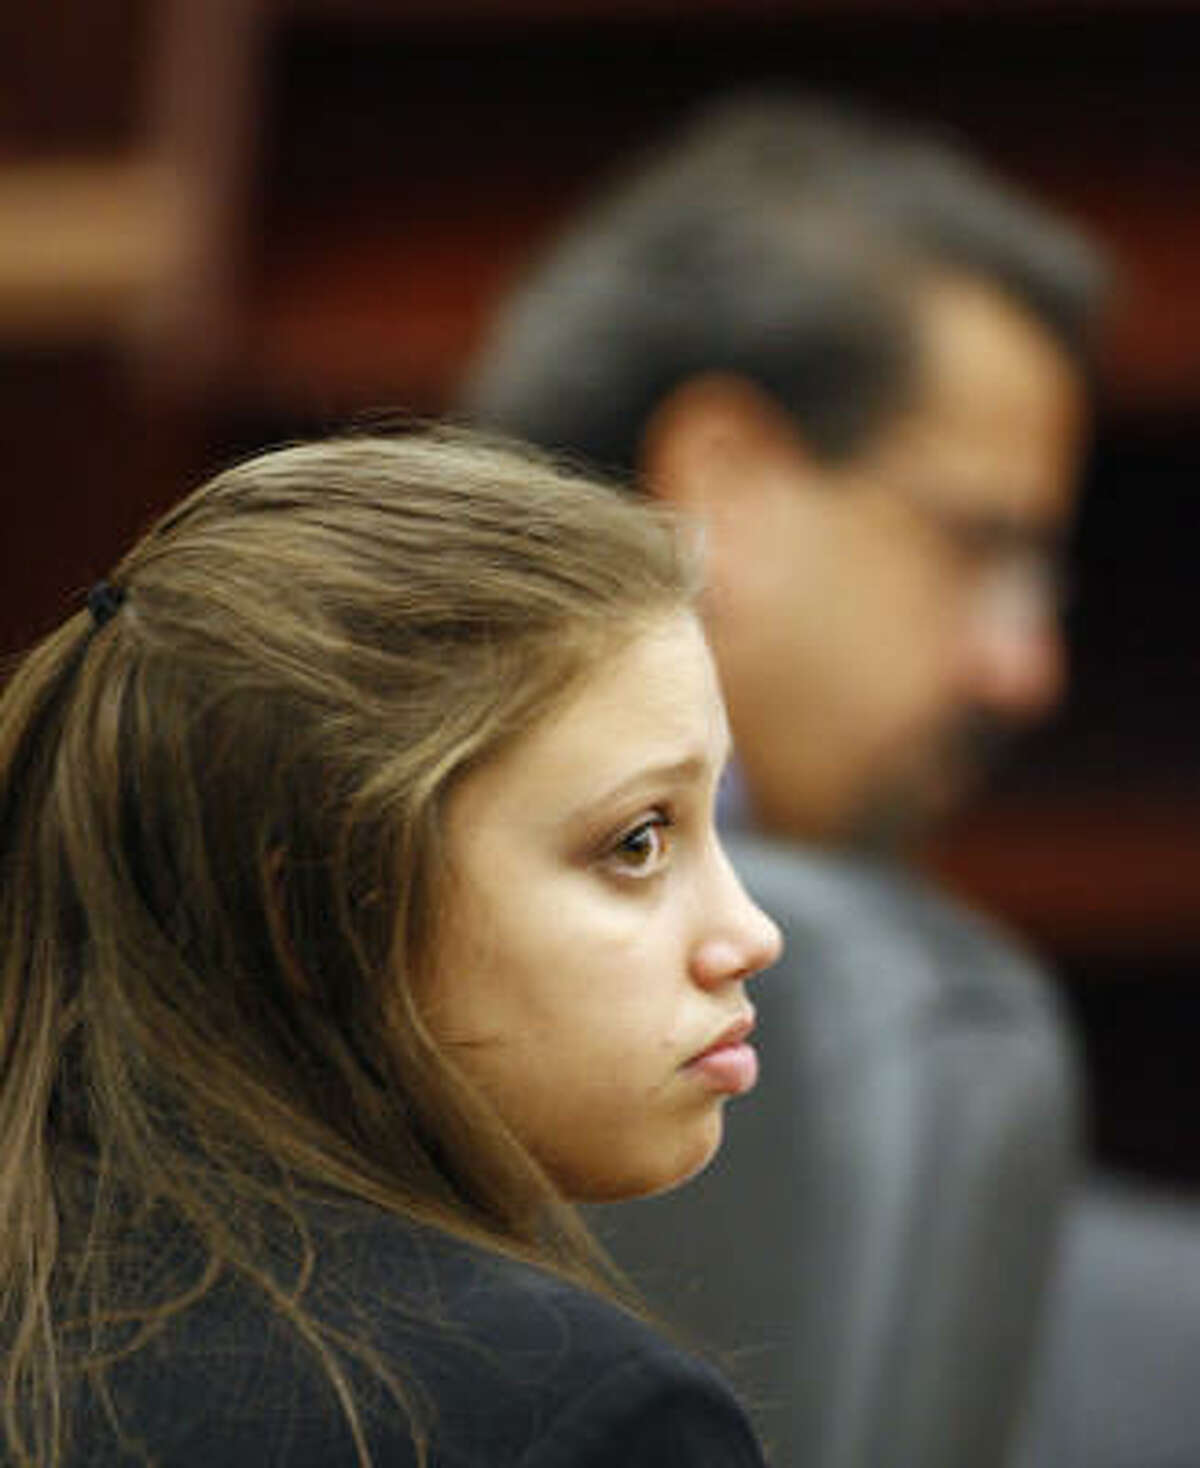 In 2007, Ashley Benton went on trial for the murder of Gabriel Granillo. The trial ended with a hung jury. Benton later pleaded guilty to aggravated assault.